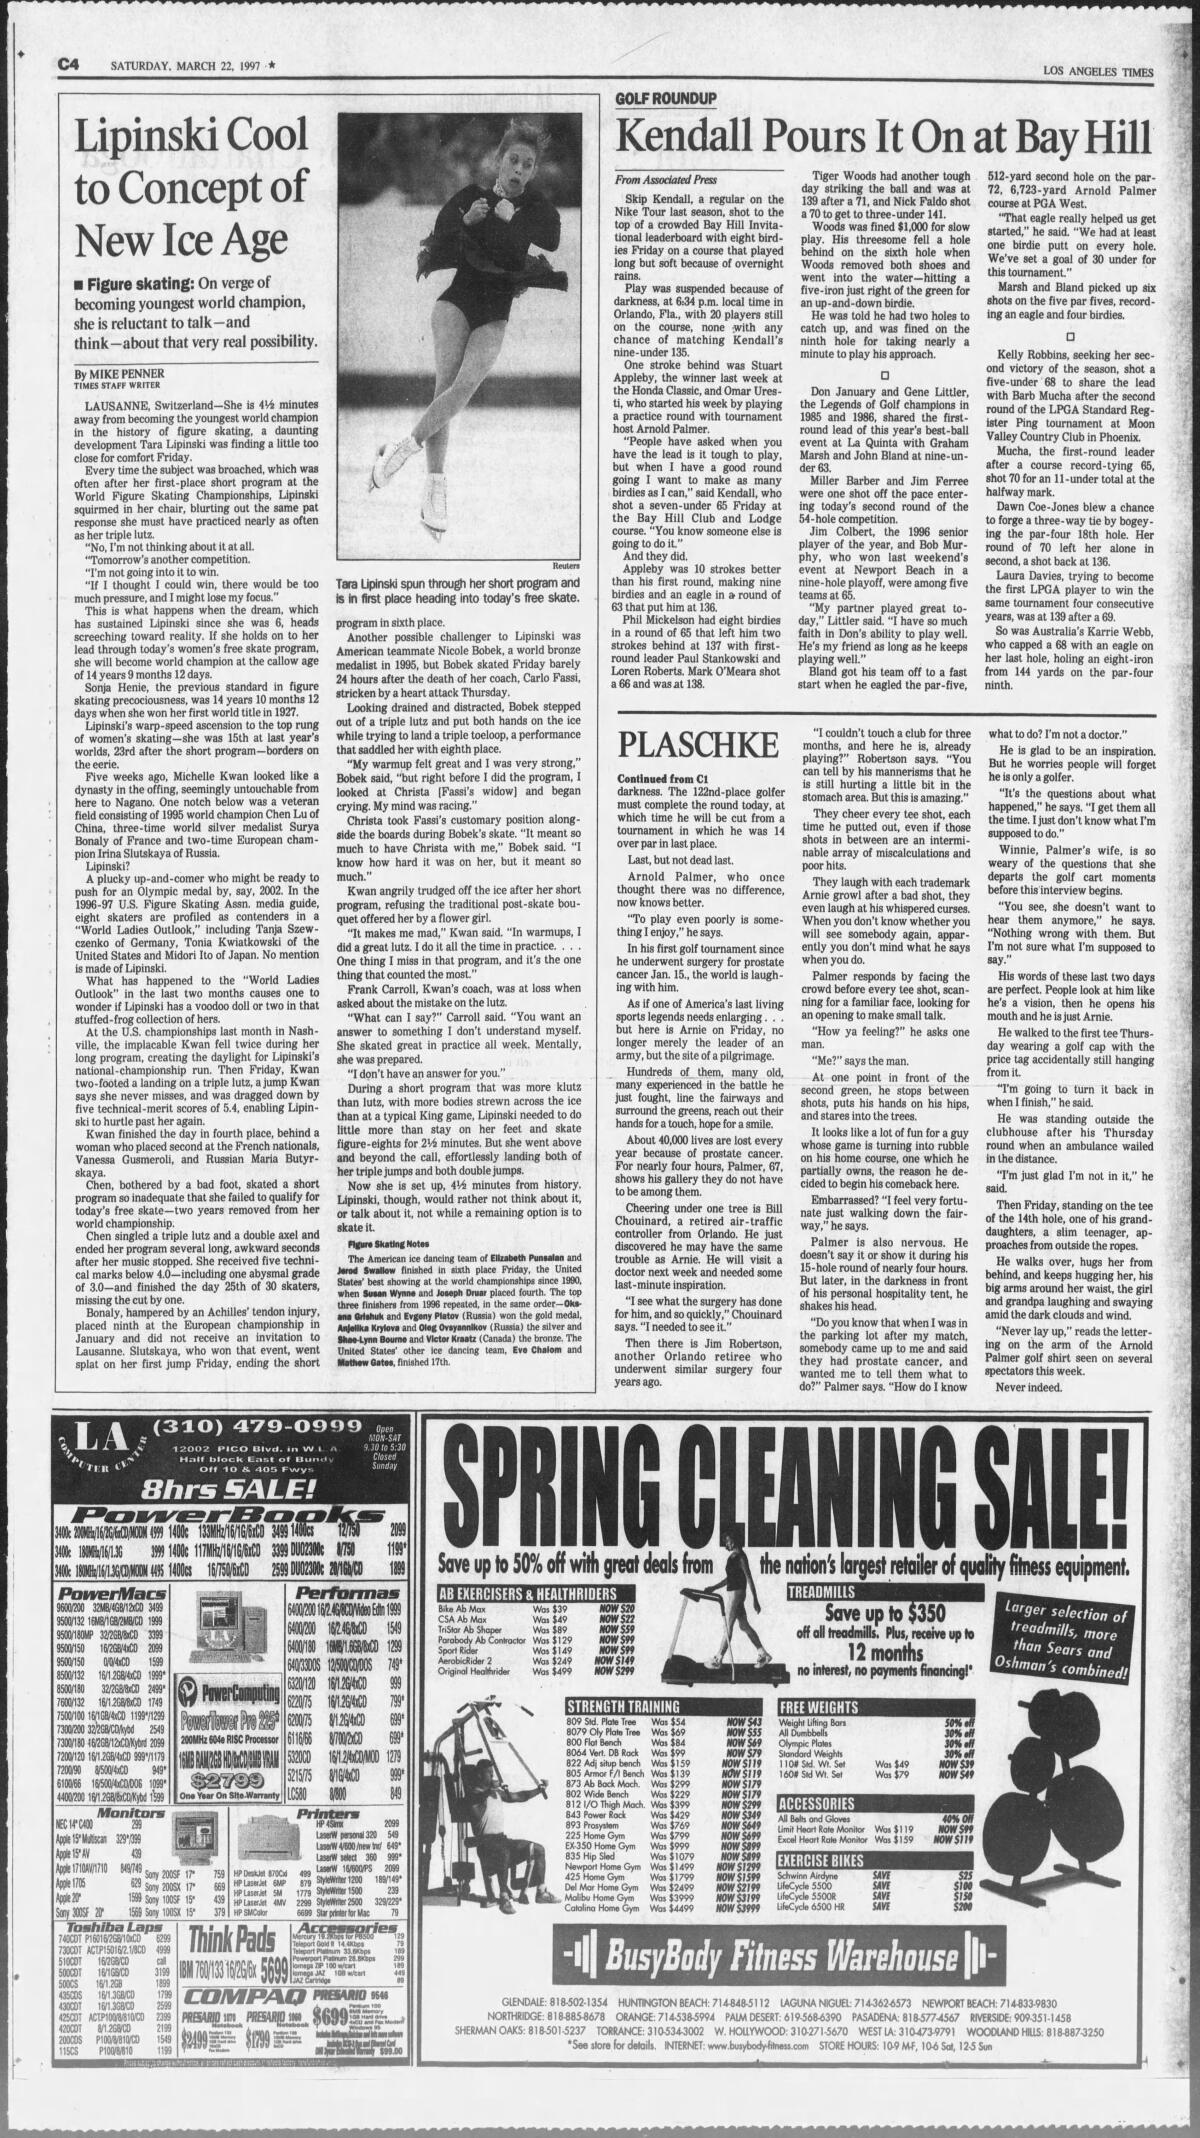 The Los Angeles Times covers Tara Lipinski becoming the world's youngest figure skating champion in 1997.